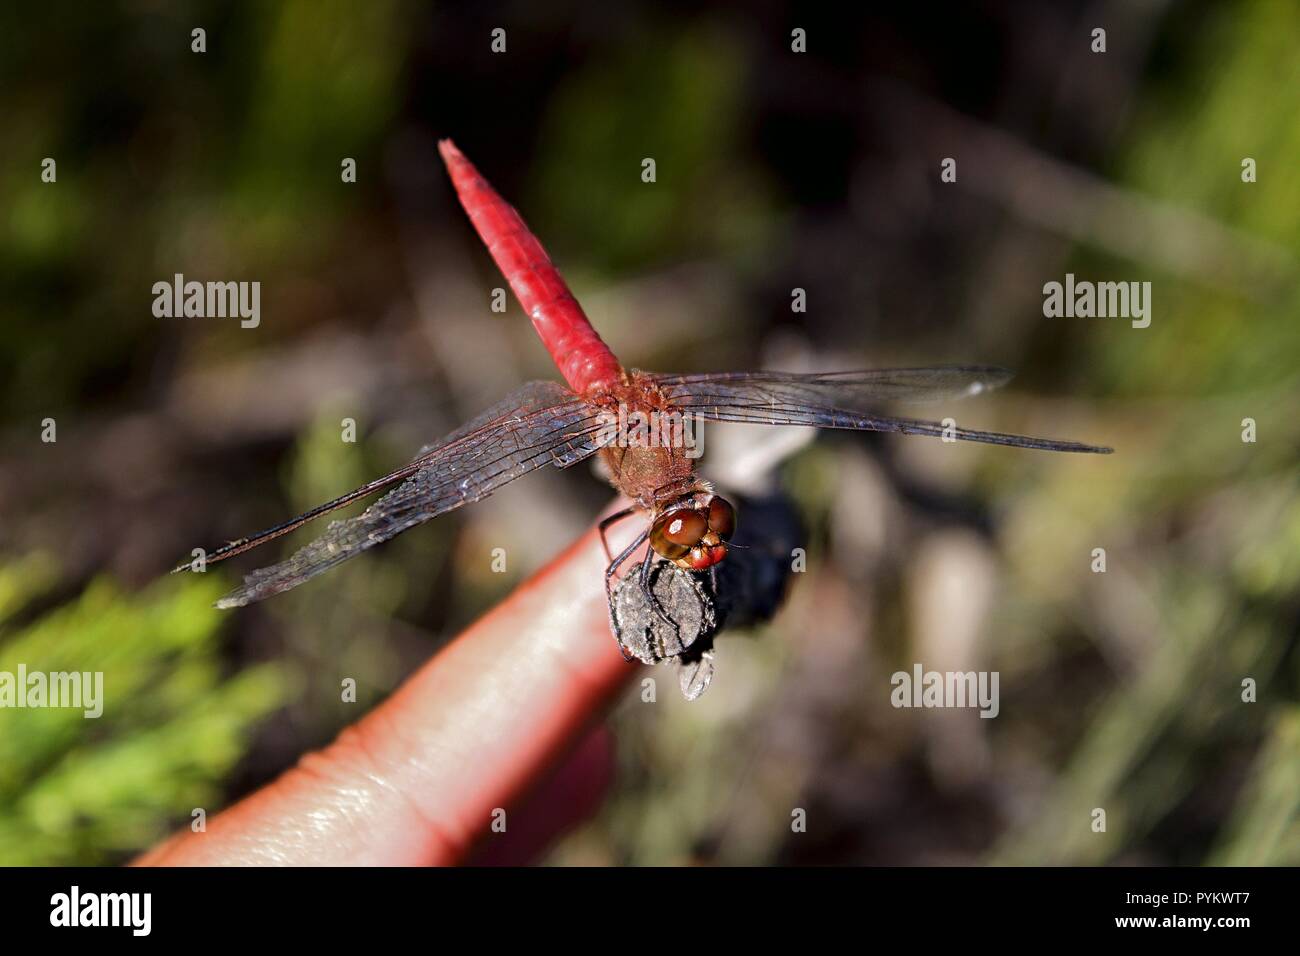 A very trusting dragonfly. Stock Photo